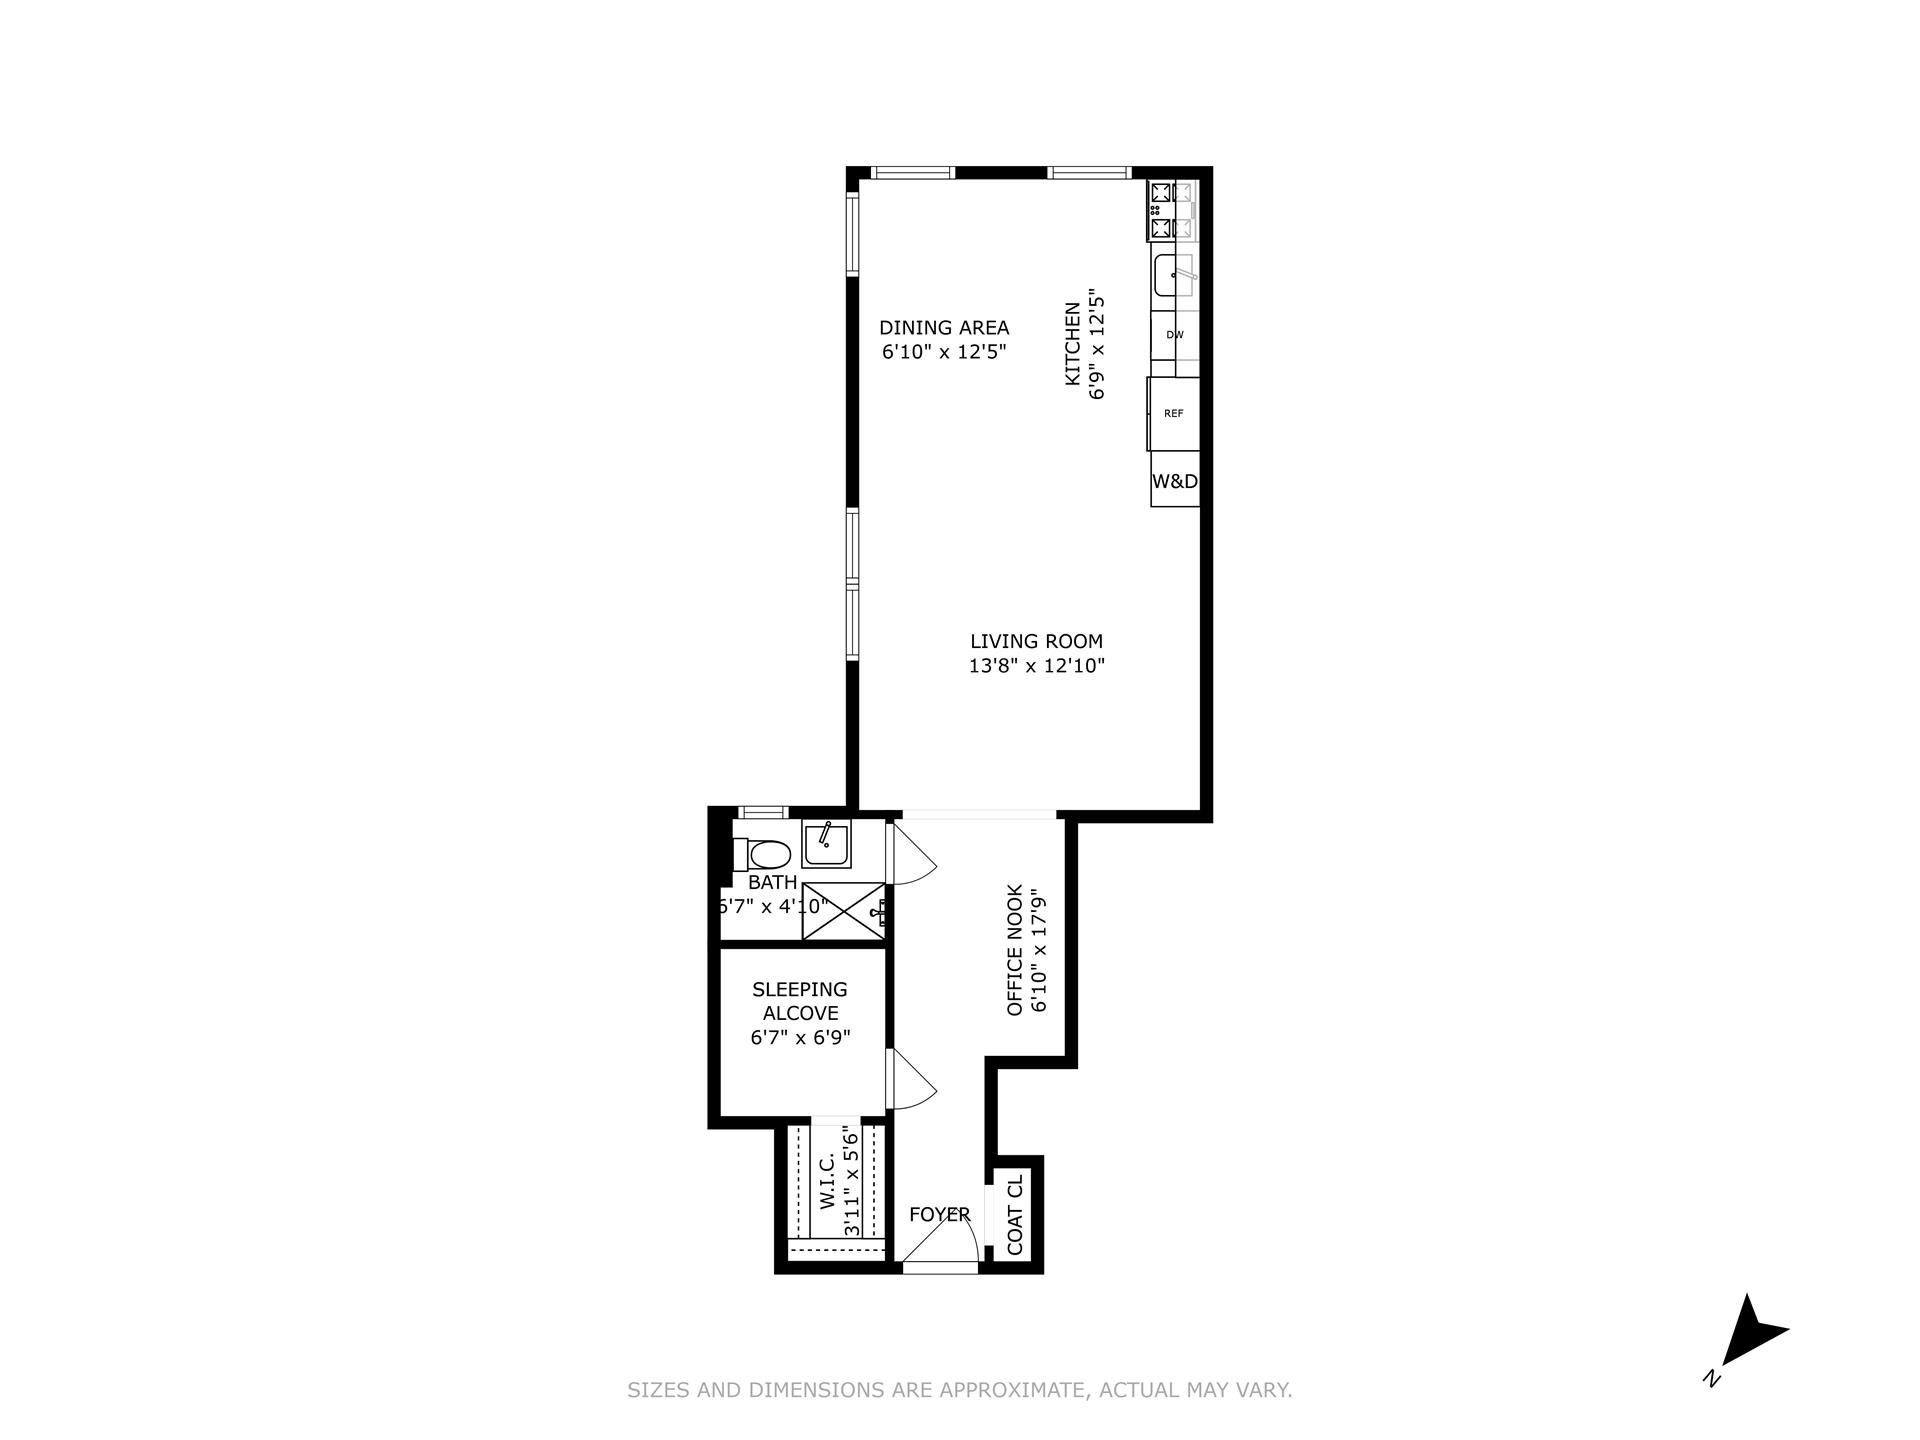 Floorplan for 25 Indian Road, 2A